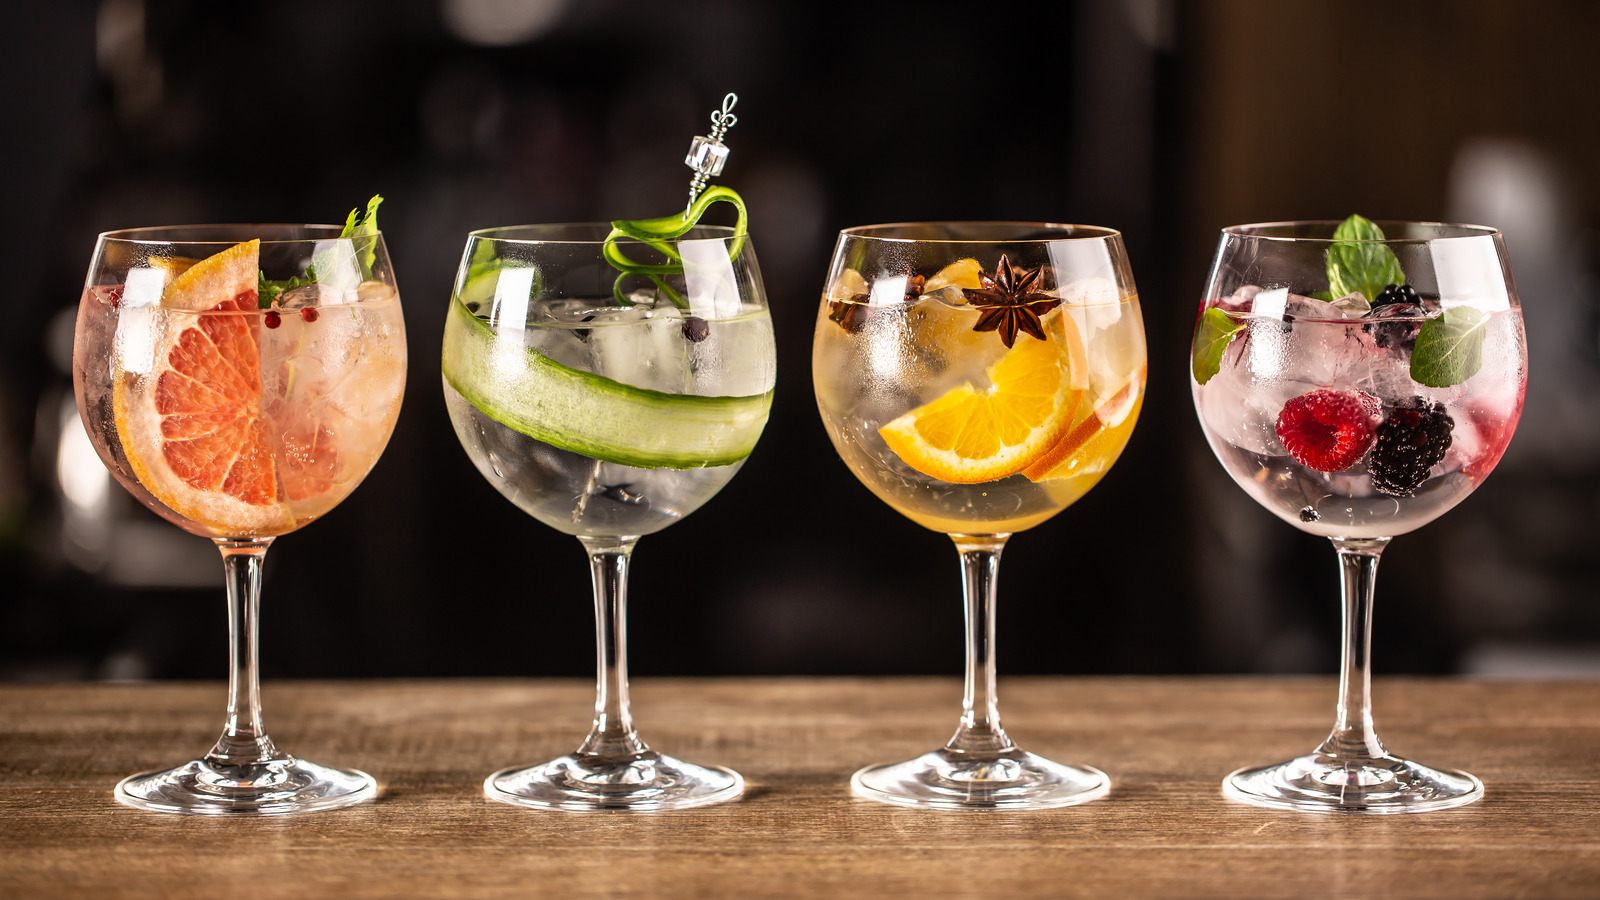 https://www.tastingtable.com/img/gallery/11-cocktails-to-try-if-you-like-drinking-gin/l-intro-1659025591.jpg